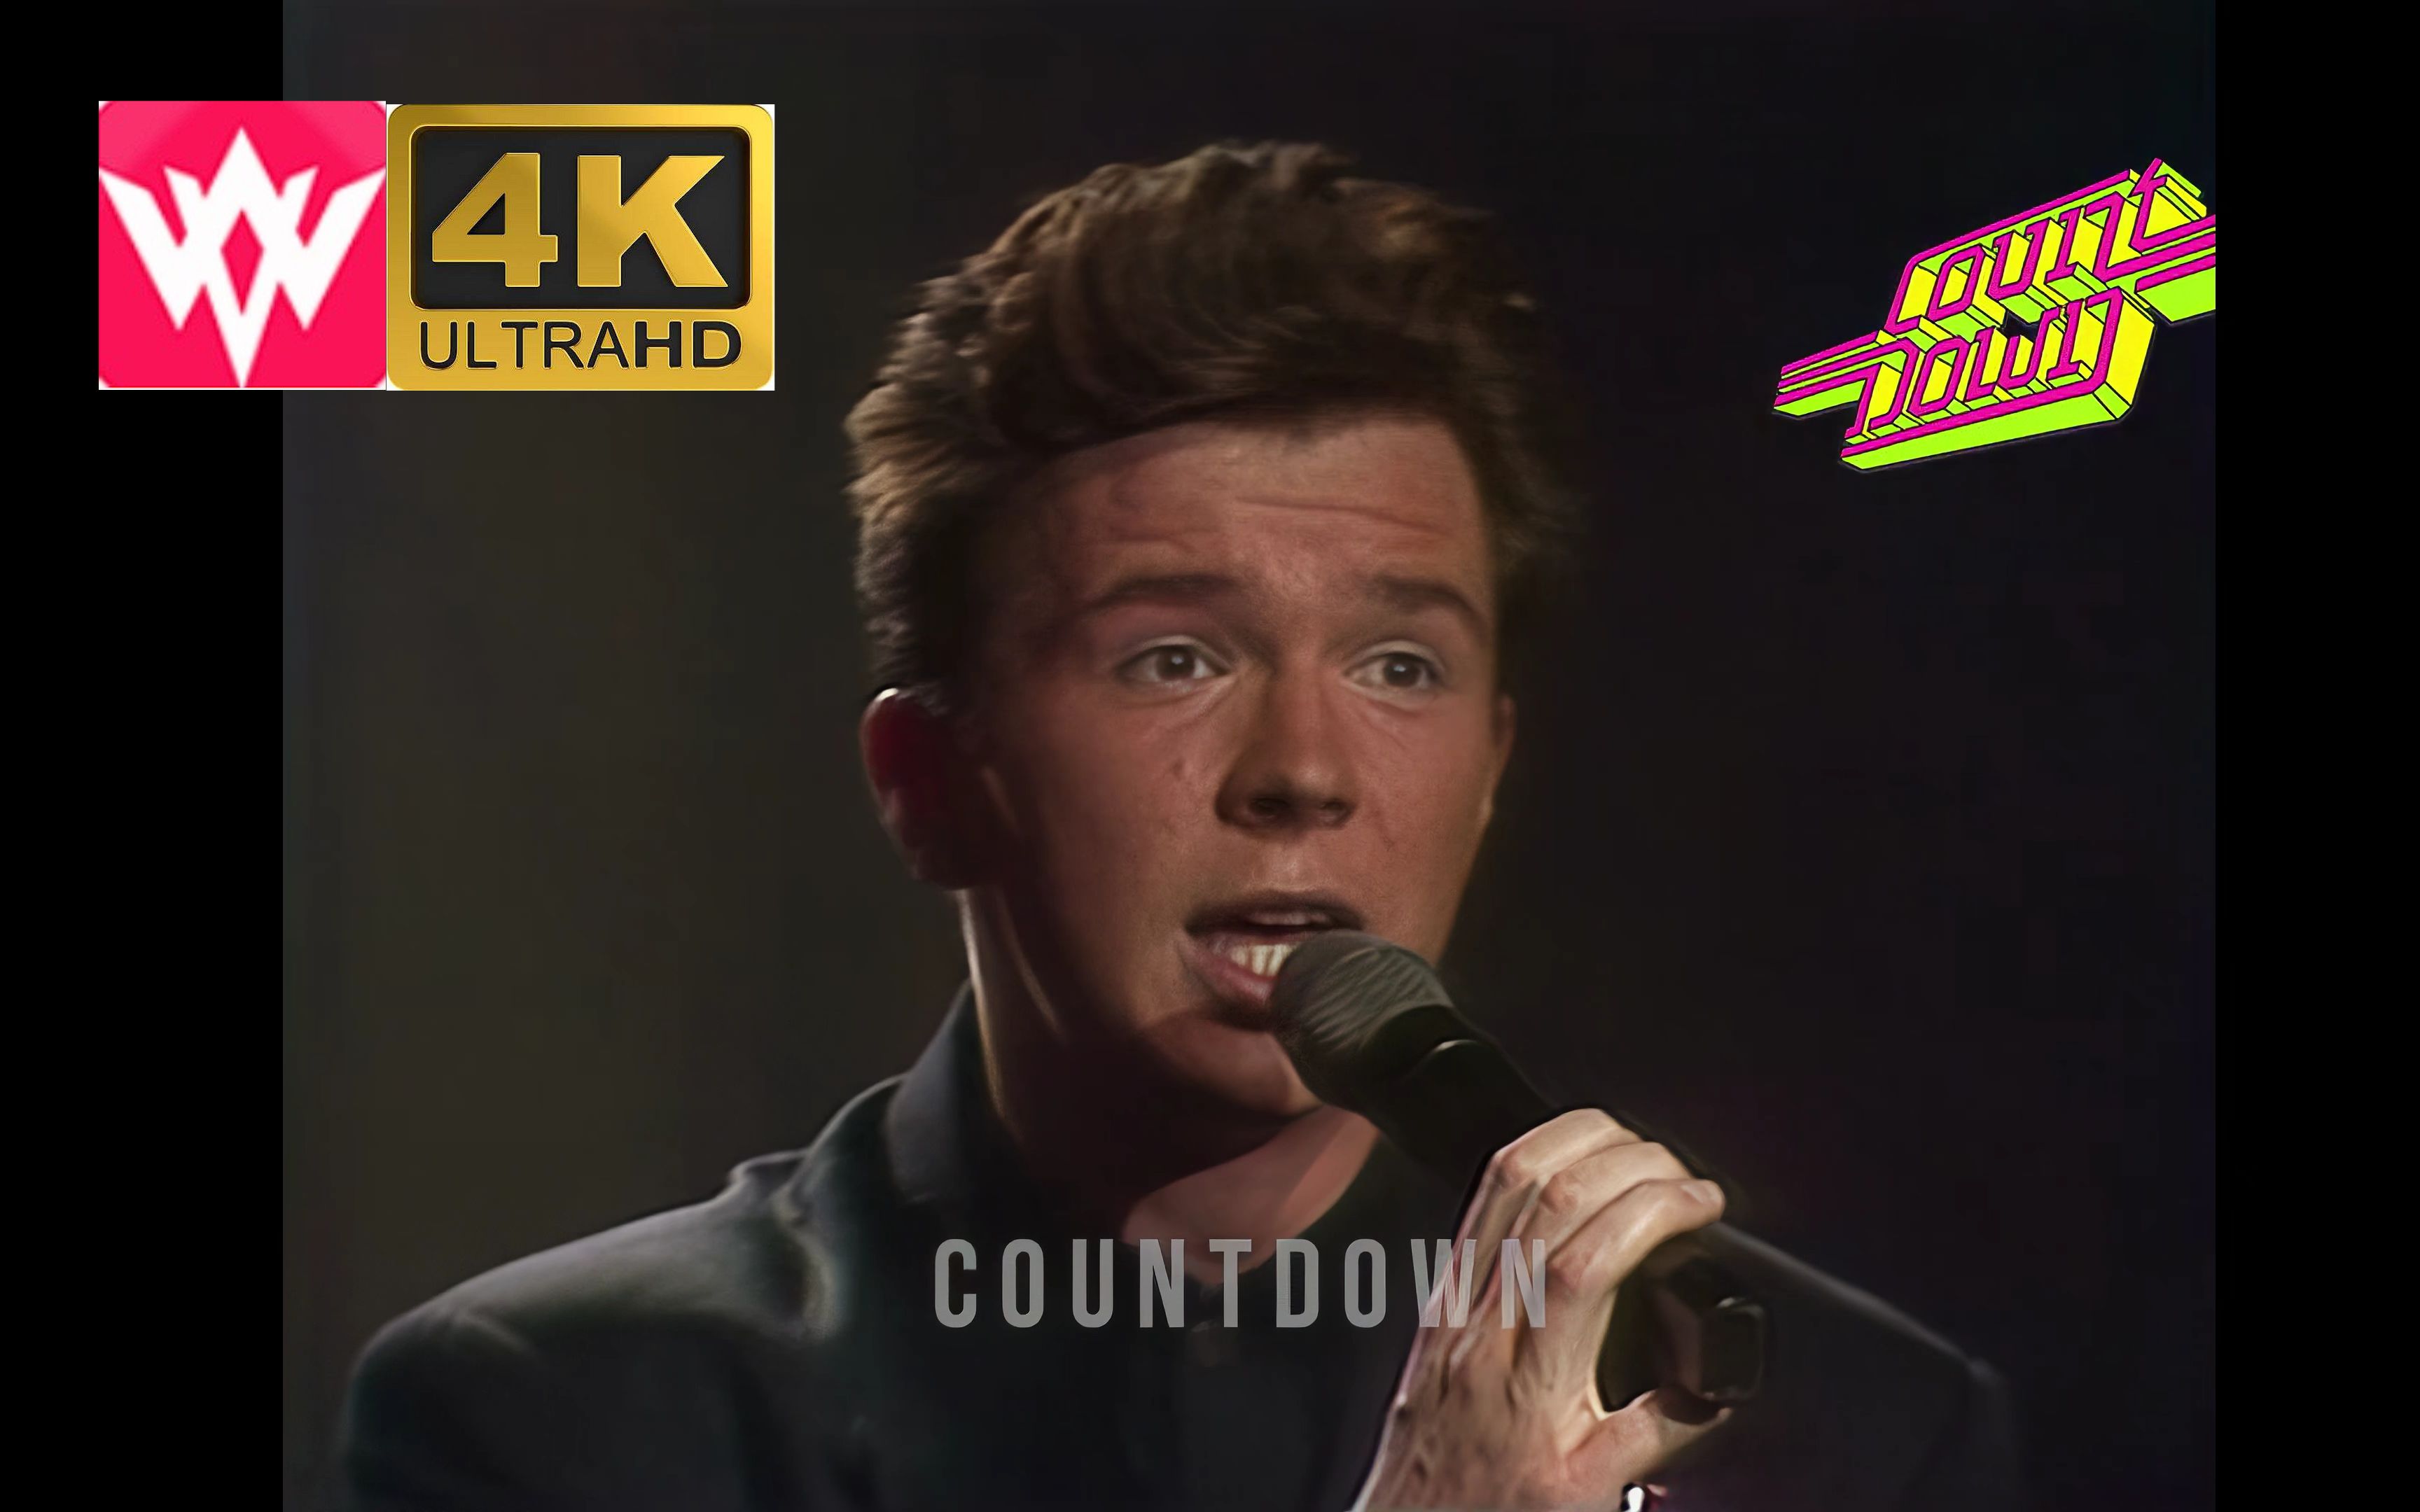 【4k Uhd】《rick Astley Never Gonna Give You Up》 Countdown 1987永不放弃你，tv版修复 9272